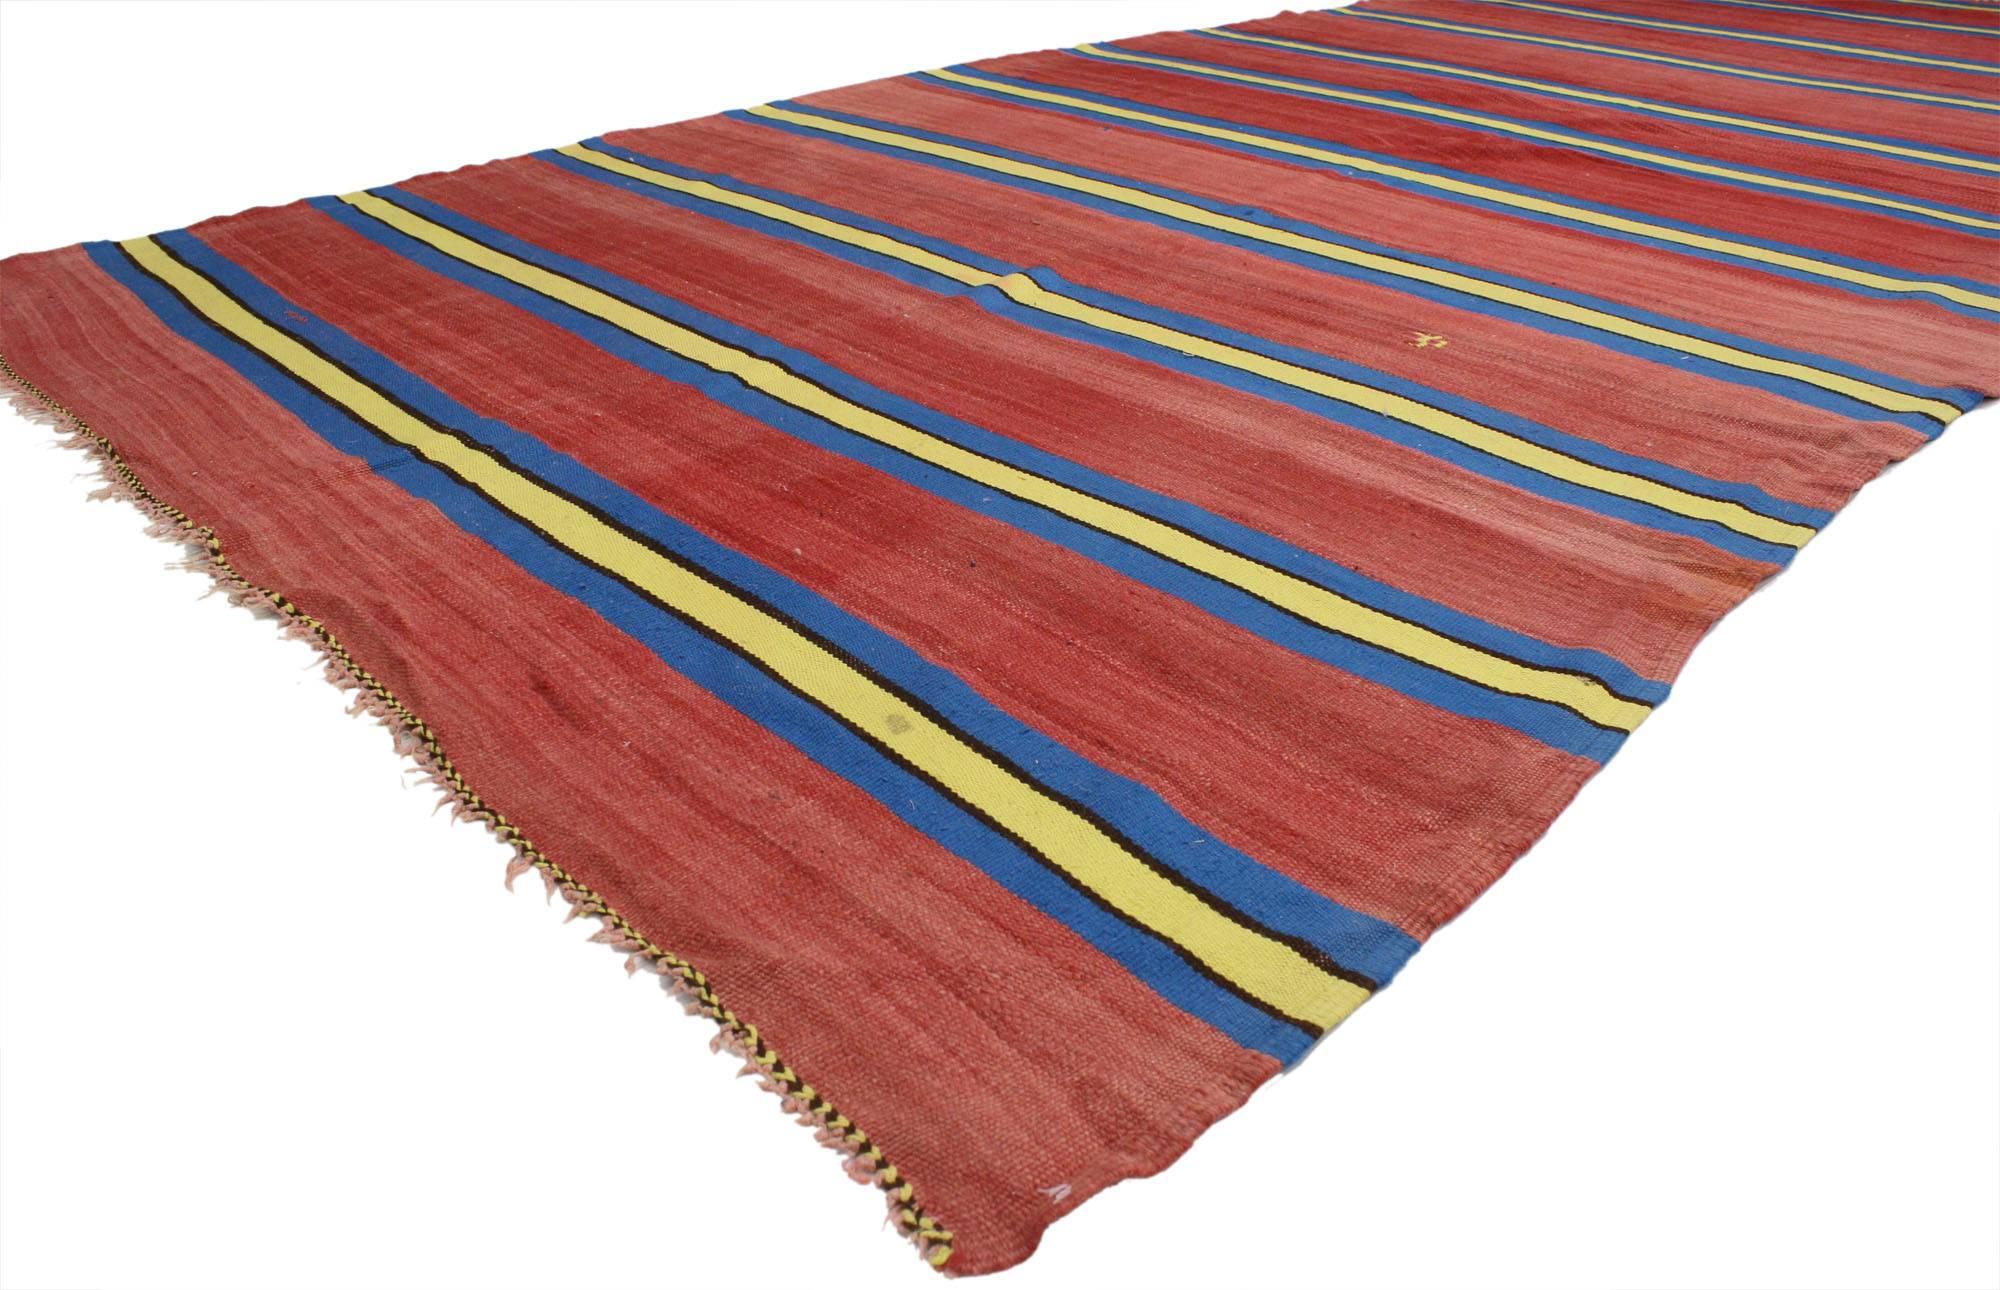 20536 Vintage Berber Moroccan Striped Kilim Rug with Modern Nautical Style 06'00 x 12'06. This handwoven wool vintage Berber Moroccan striped Kilim rug  features a series of Bayadere stripes composed of horizontal blue and yellow bands in groups of